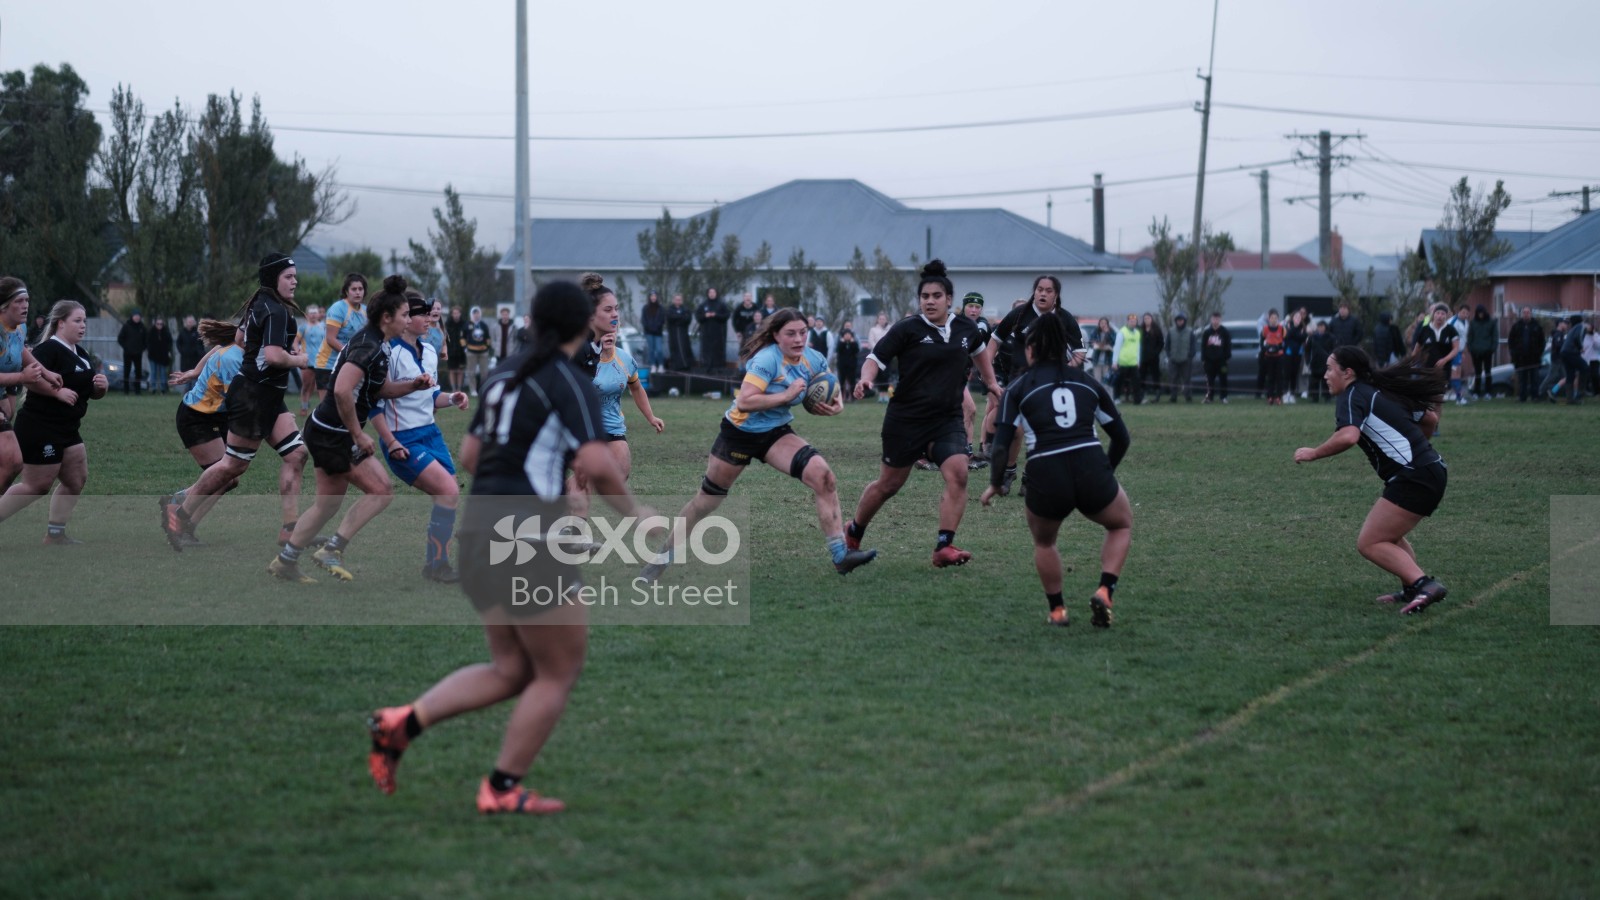 Women's rugby game in-play